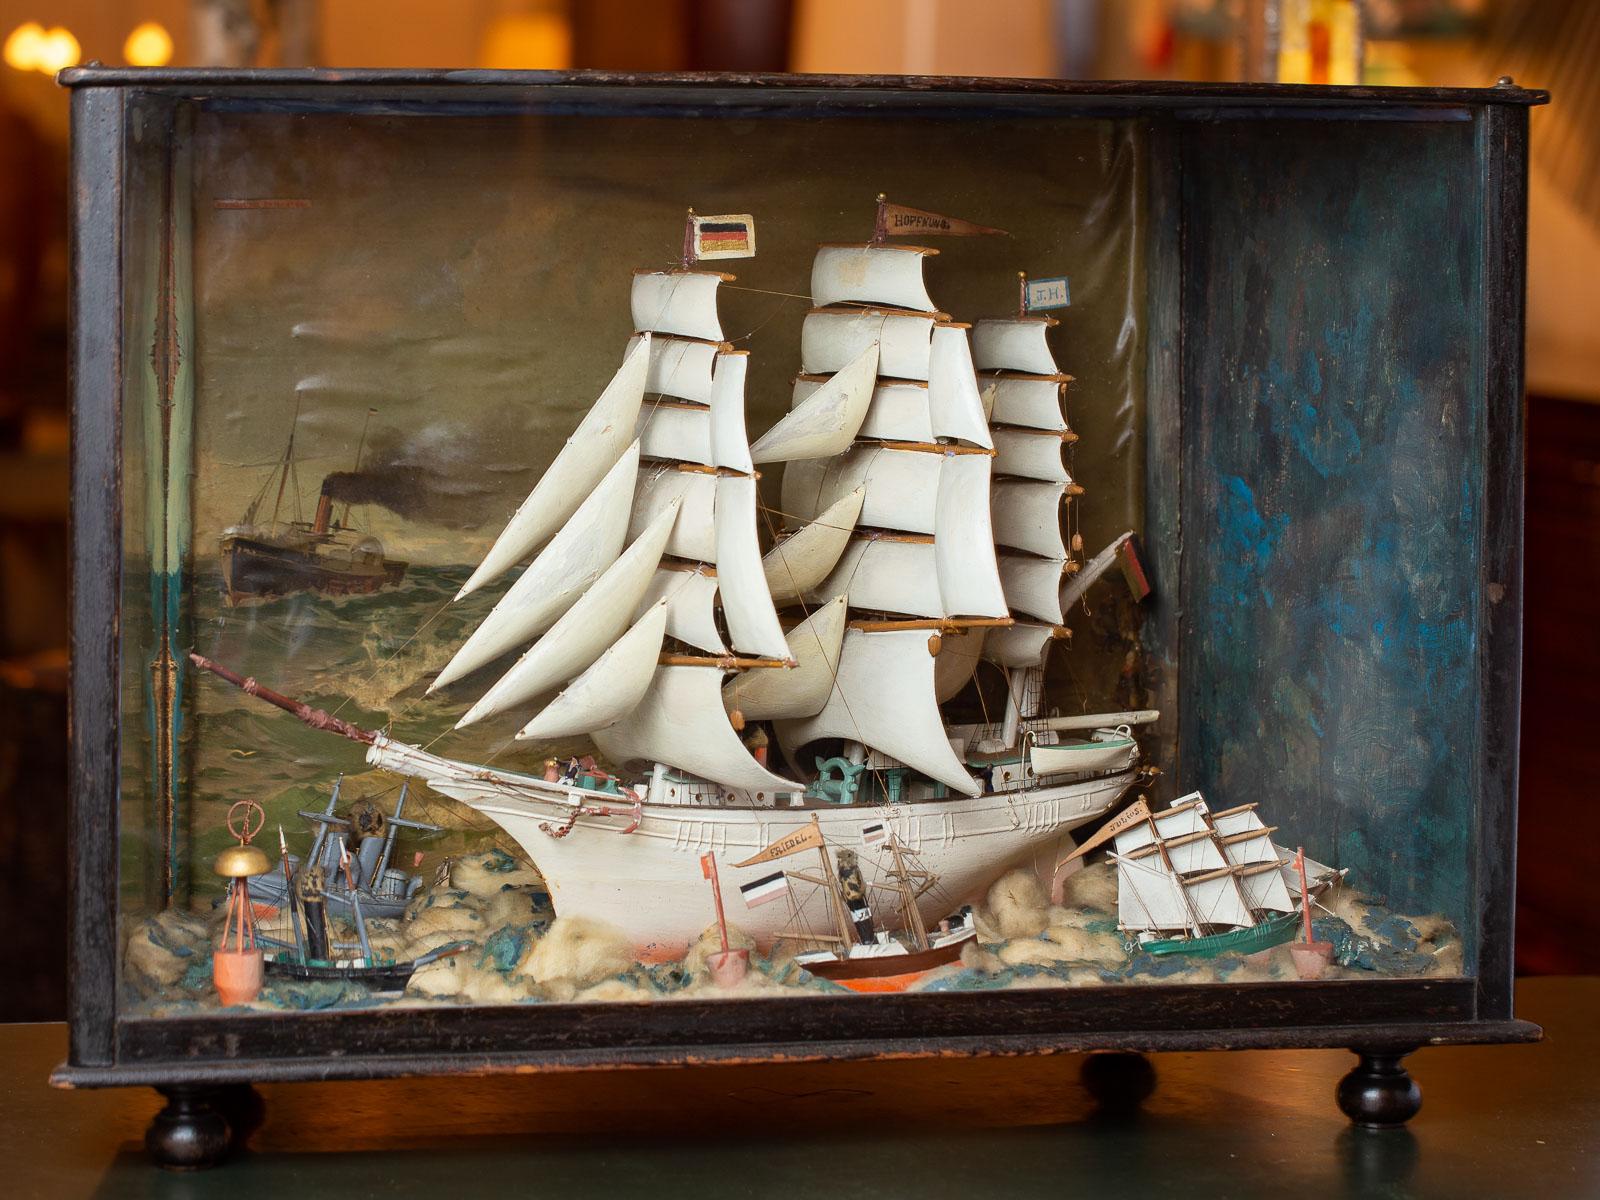 A fantastic vintage German handmade sailing ship diorama circa 1940 of the Hoffnung, a square rigged barque. This large exhibition case retains its original glass front panel and original case and painted finish on the exterior with wonderful